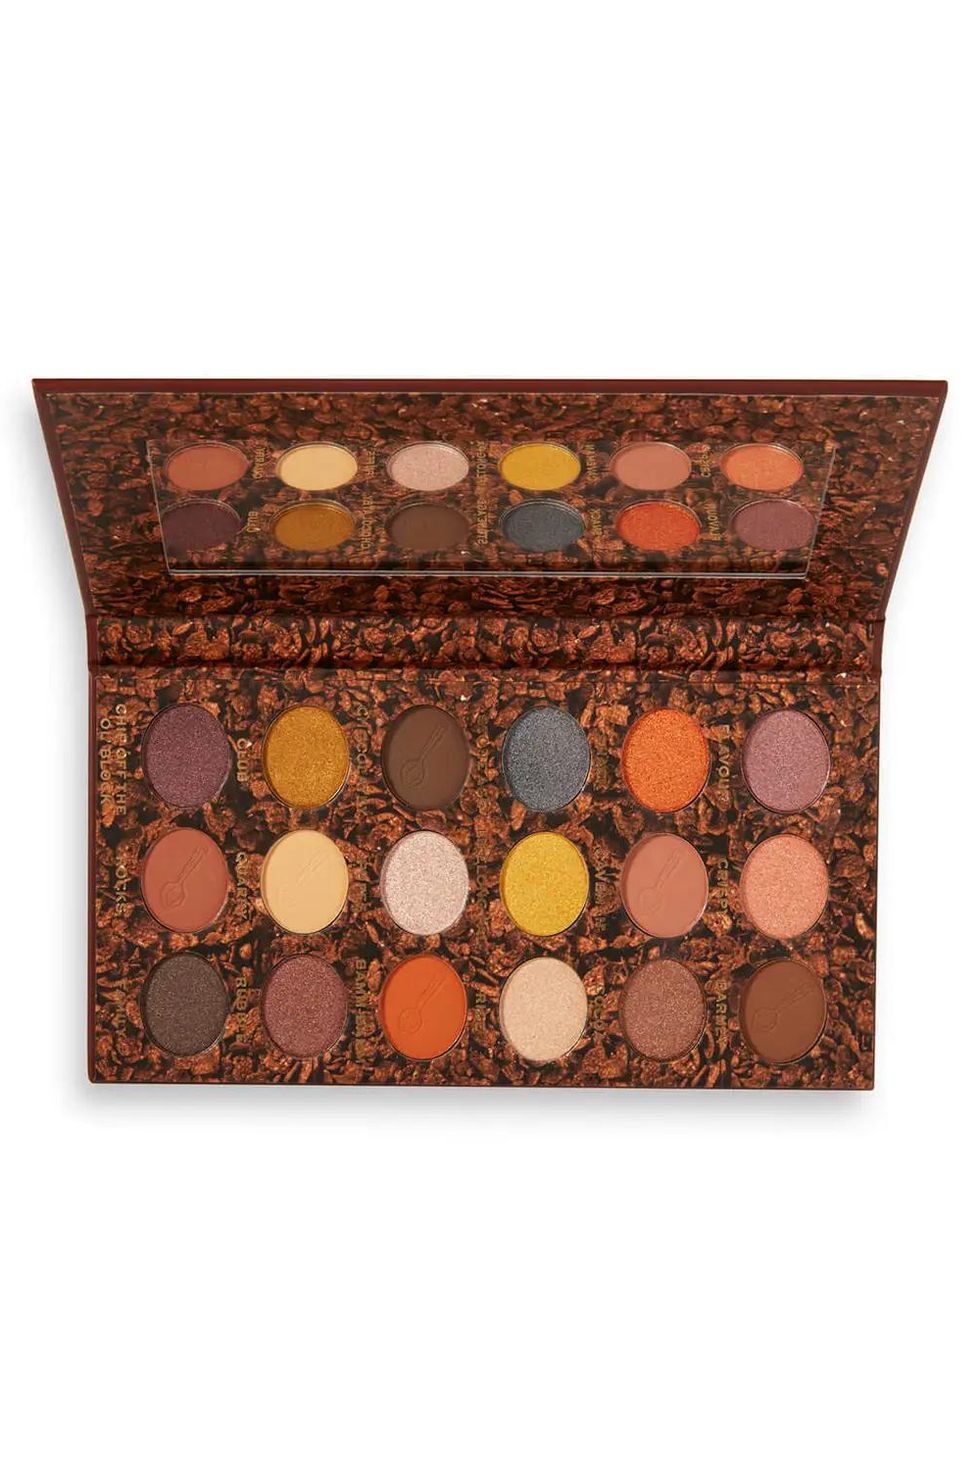 Revolution Beauty Just Dropped A Fruity and Cocoa Pebbles Makeup Collection  to Shop Now